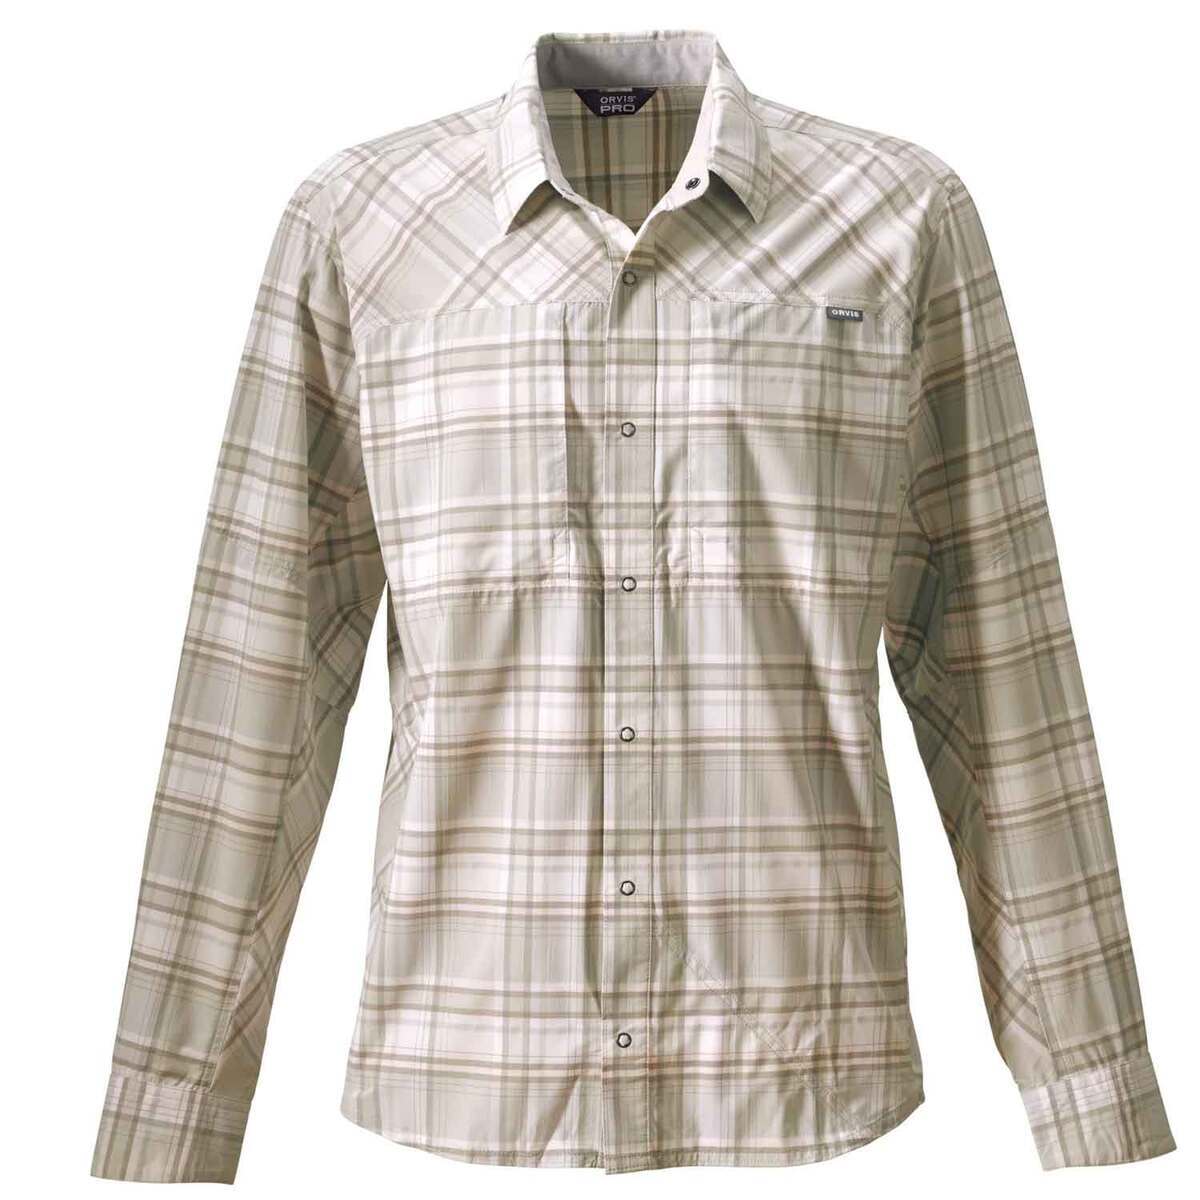 Orvis Men's GSP on Point Long Sleeve Casual Shirt - Olive L by Sportsman's Warehouse